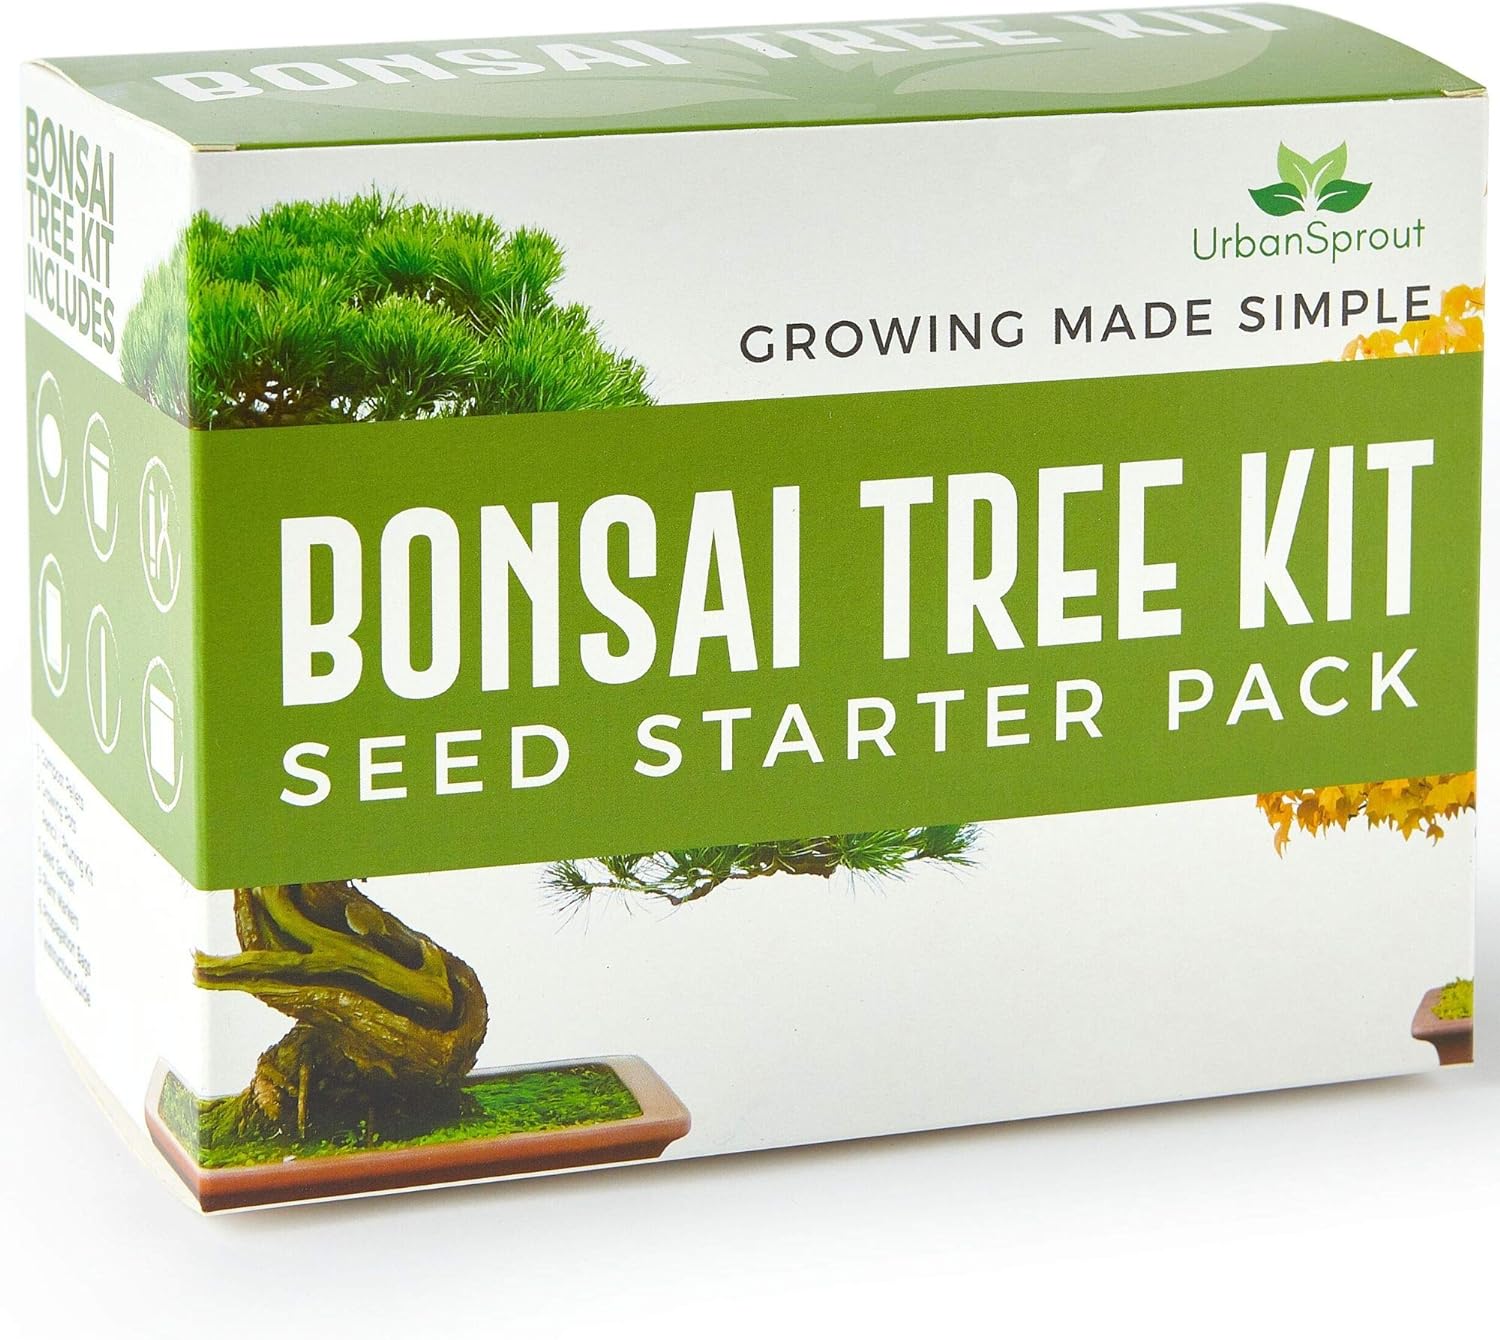 Urban Sprout Bonsai Tree Kit - Grow Your Own Bonsai Trees from Seed - Sustainable Eco Gardening Gift Set with 5 Bonzai Seed Varieties and Bonzie Starter kit Tools